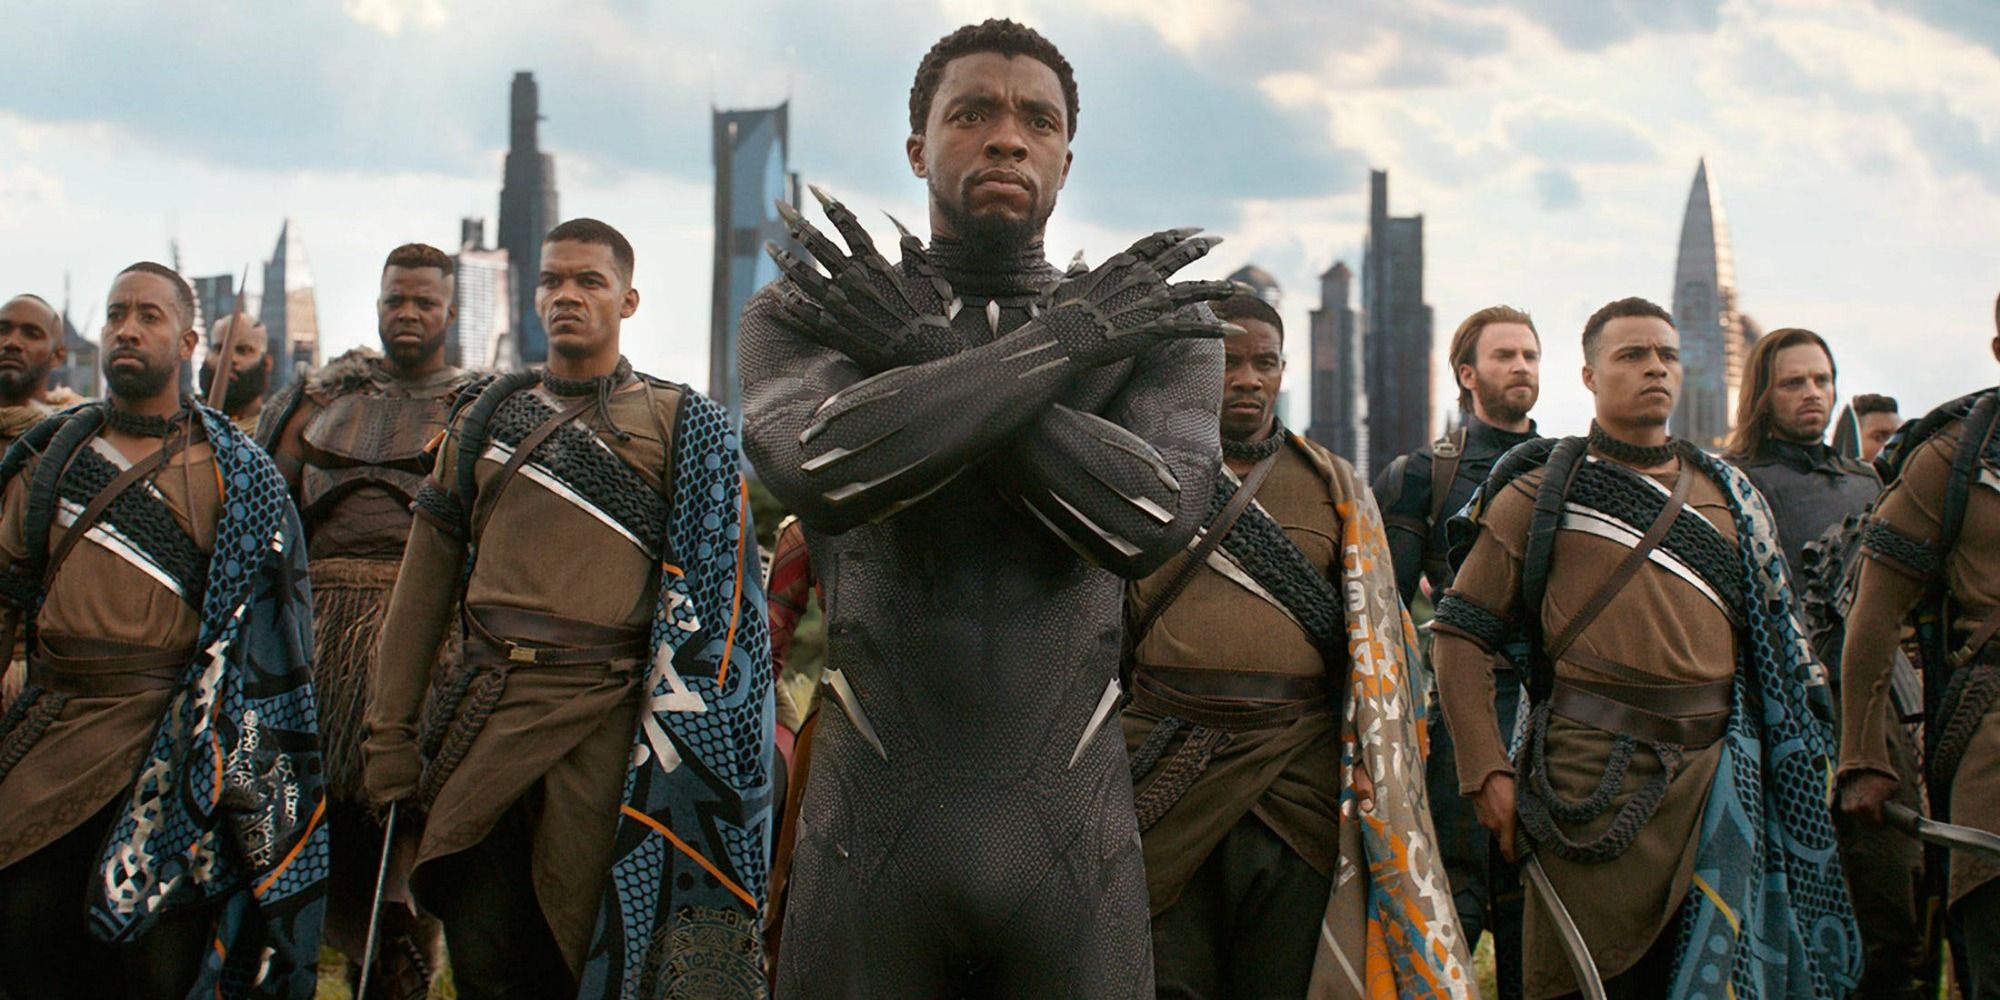 A screenshot of Chadwick Boseman's T'Challa preparing his men and other allies for battle against Thanos' army in Avengers: Infinity War